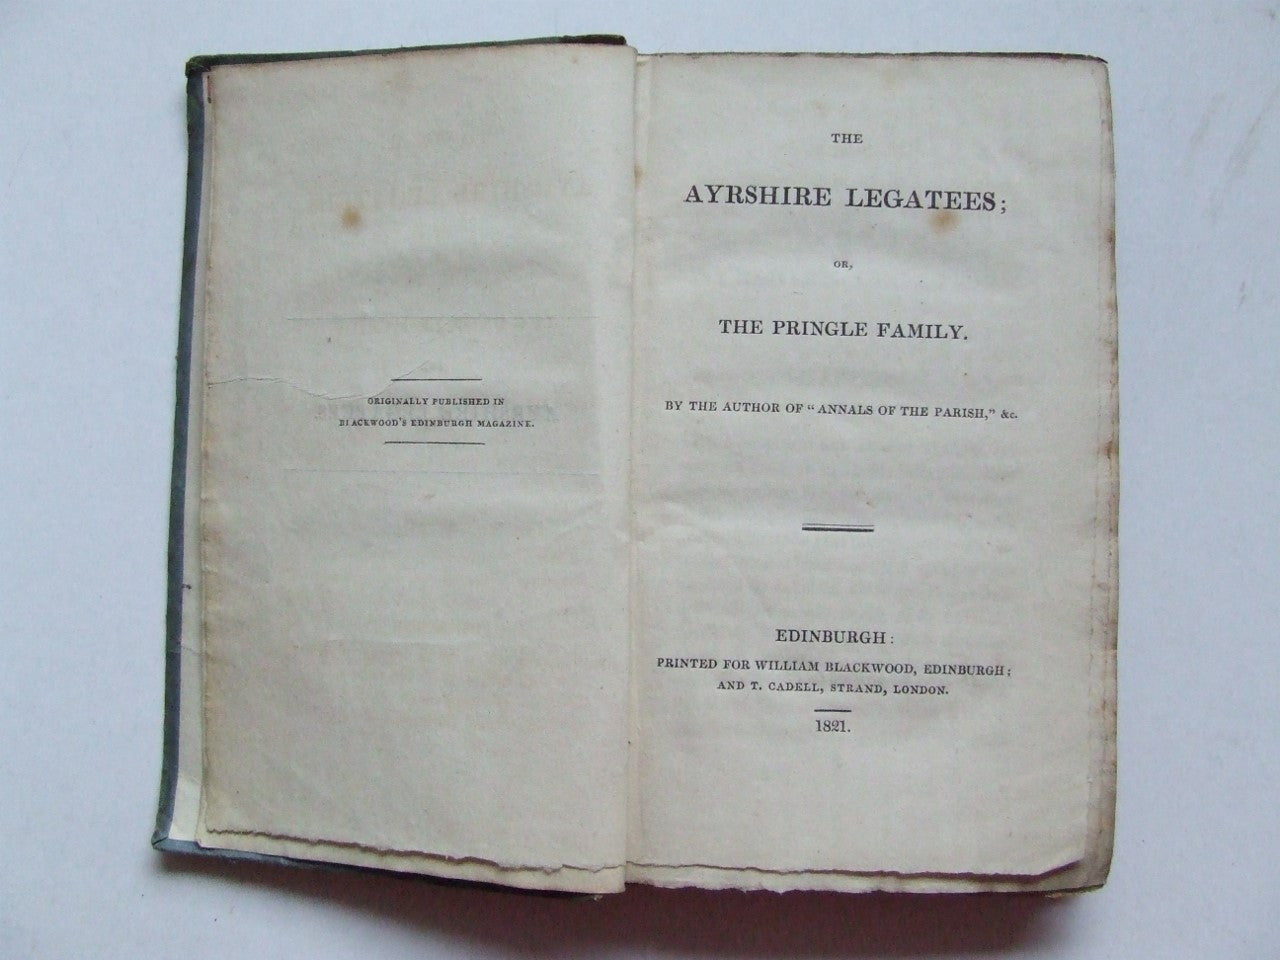 The Ayrshire Legatees; or, The Pringle Family.  by the author of "Annals of the Parish", etc.